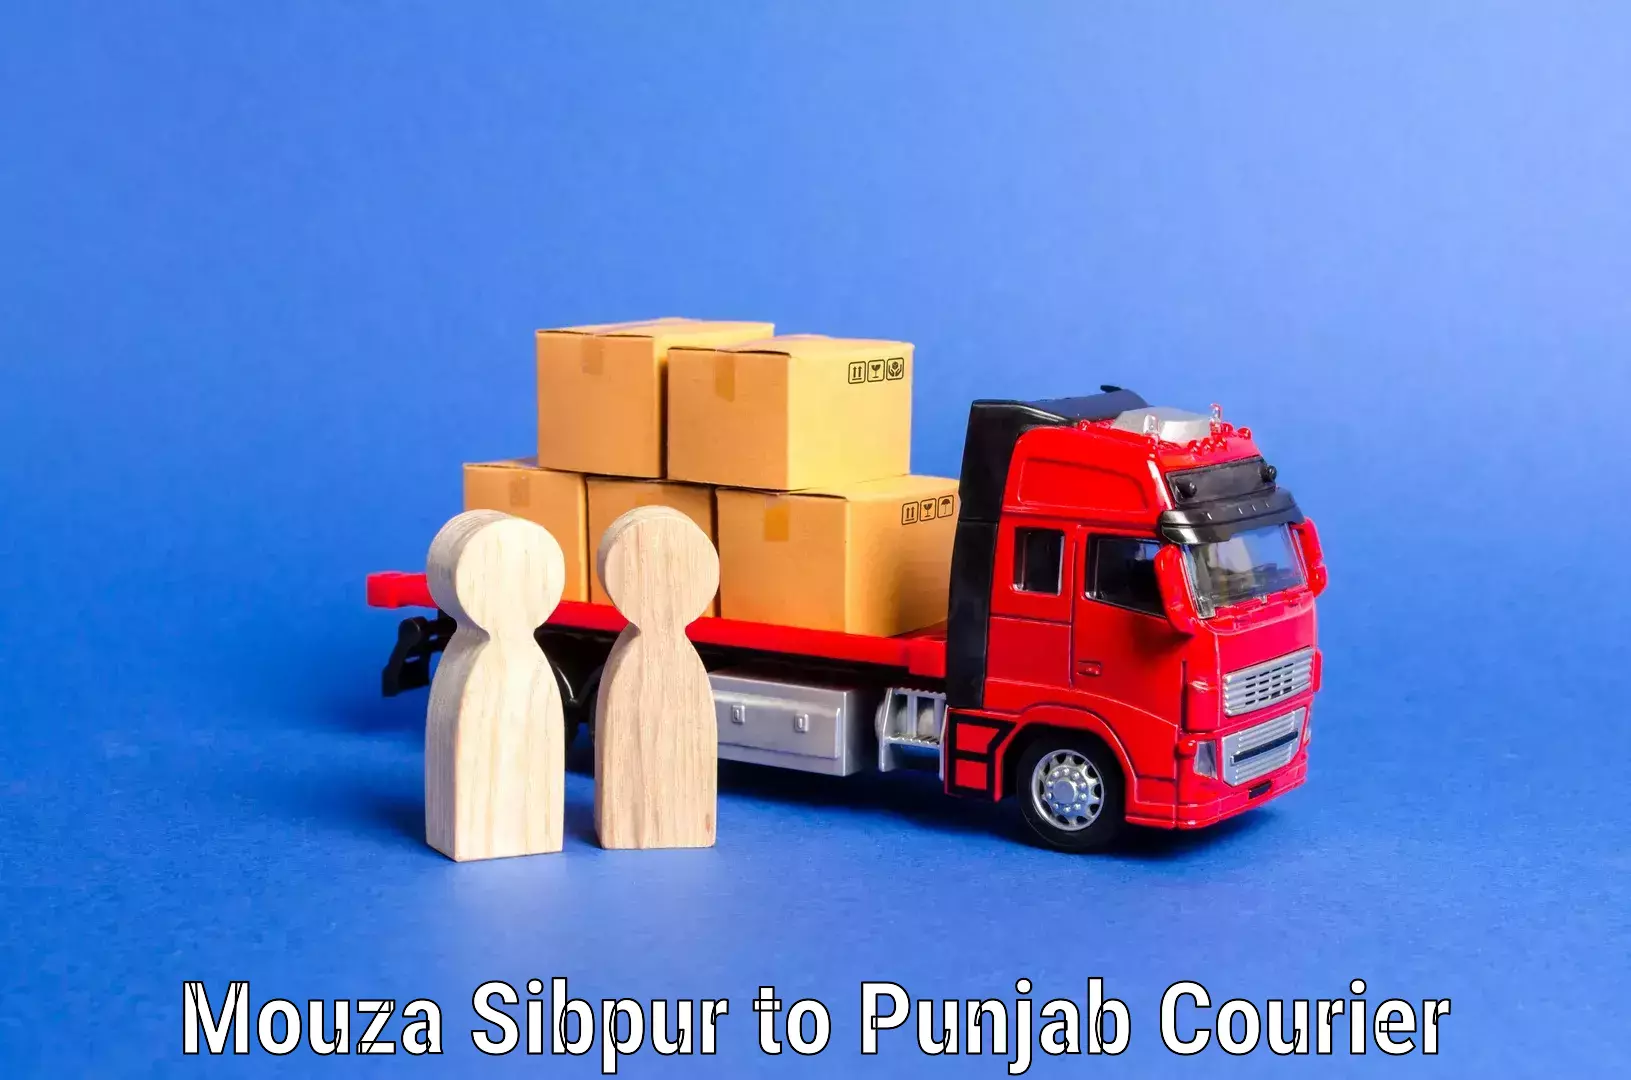 Nationwide moving services Mouza Sibpur to Punjab